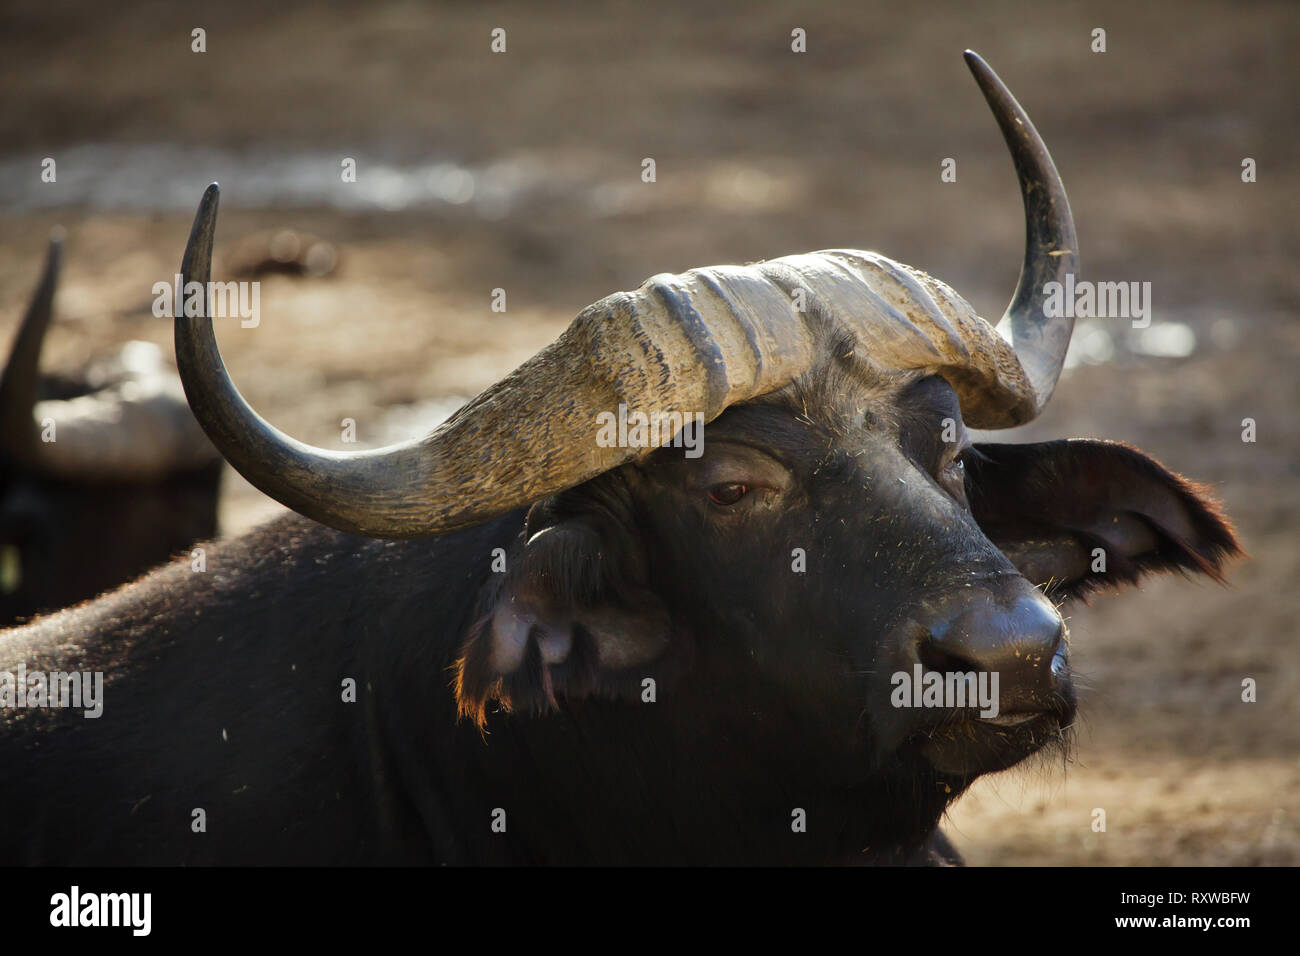 Cape buffalo (Syncerus caffer caffer), commonly known as the African buffalo. Stock Photo